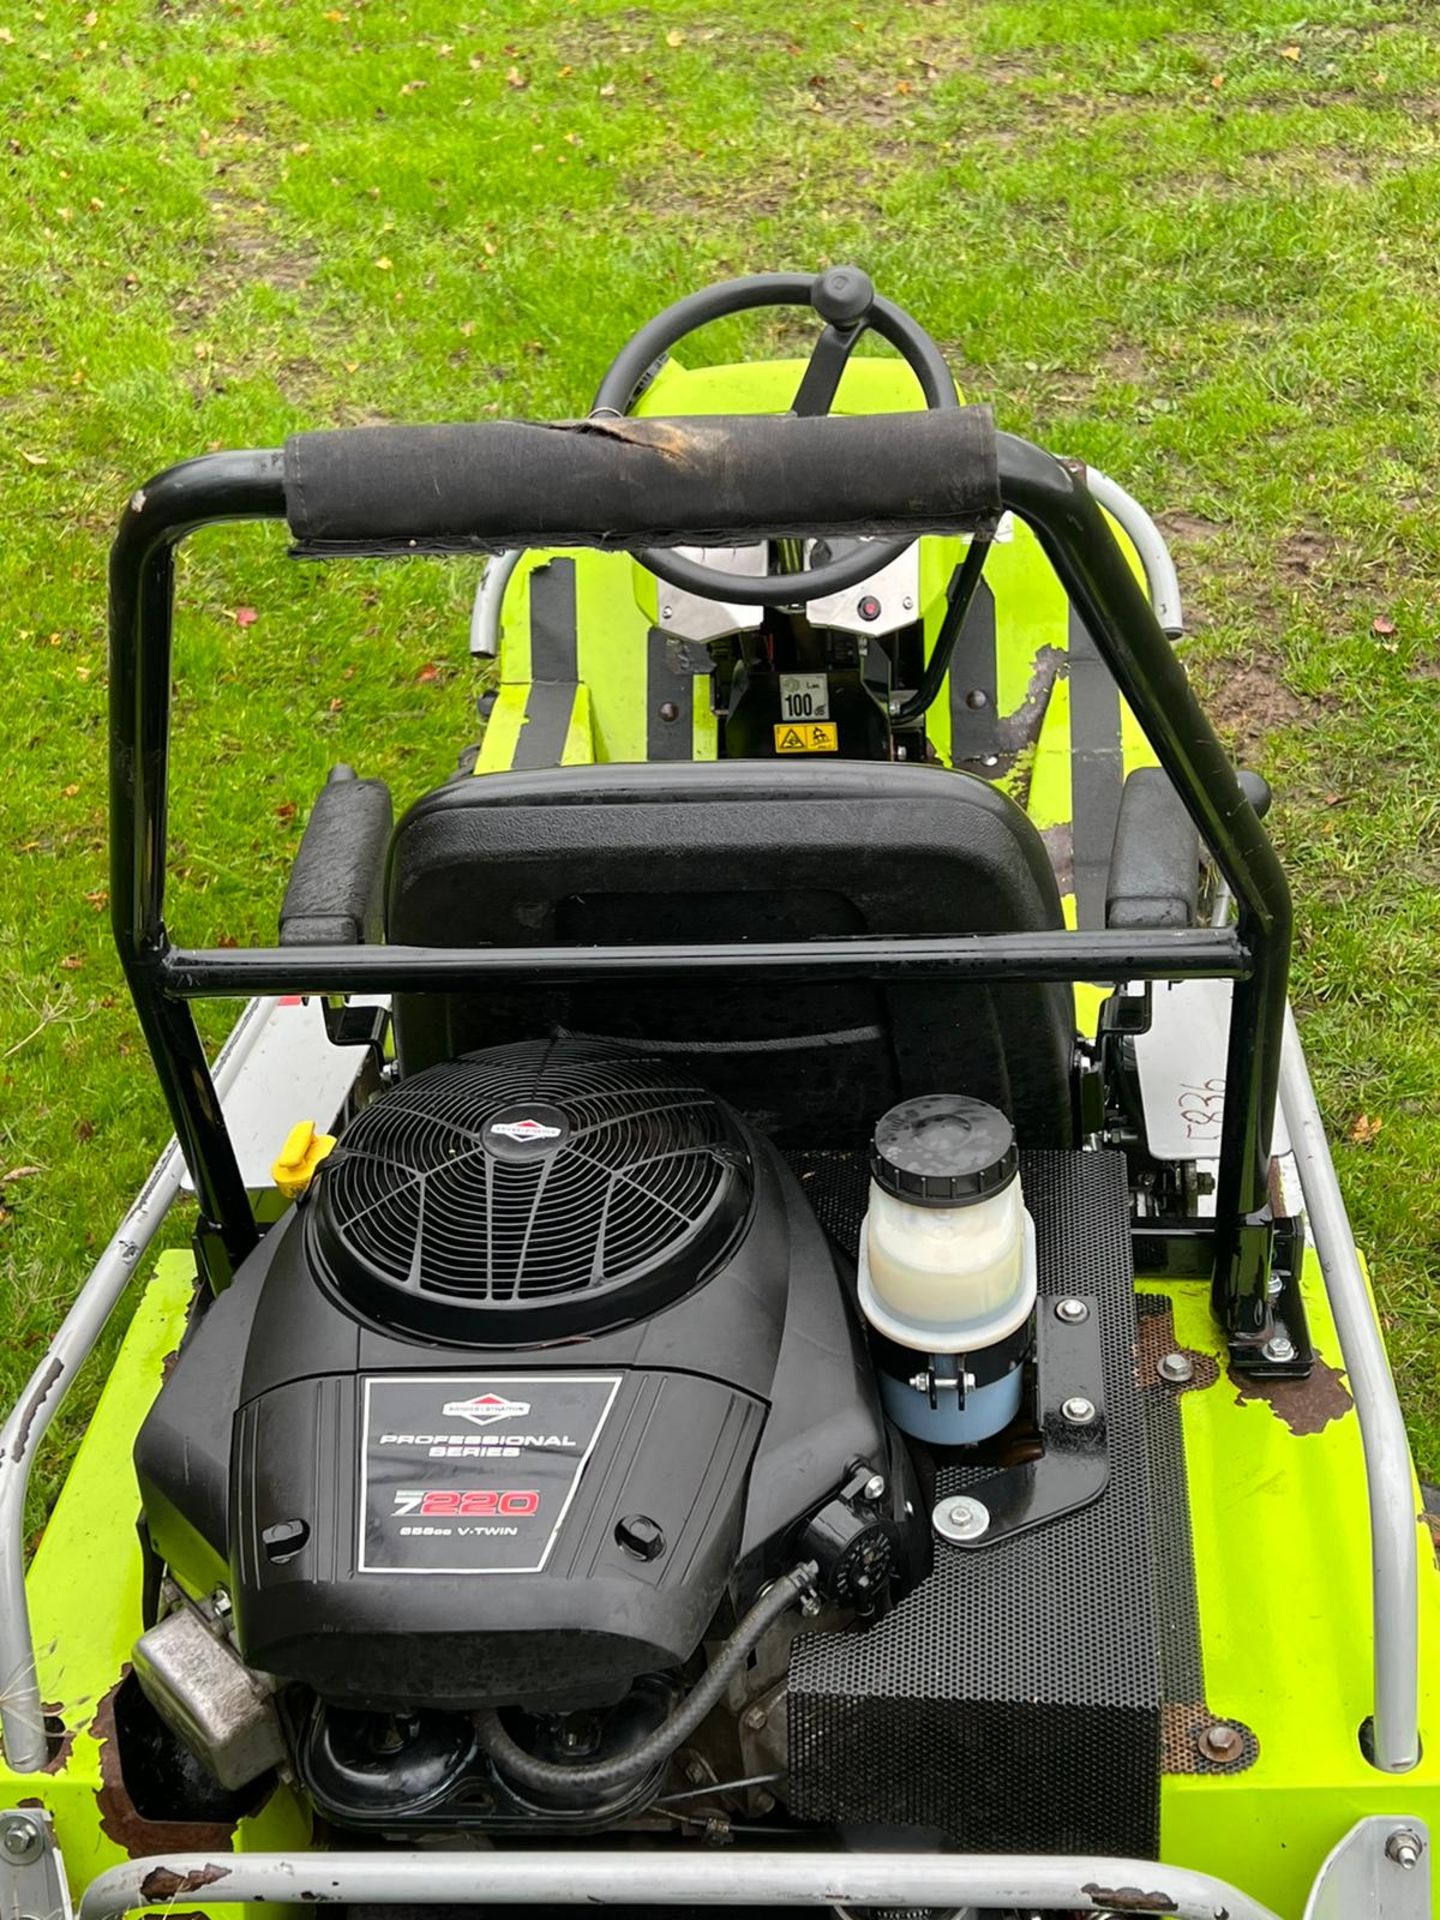 GRILLO CLIMBER 922 RIDE ON LAWN MOWER BANK MOWER *PLUS VAT* - Image 3 of 6